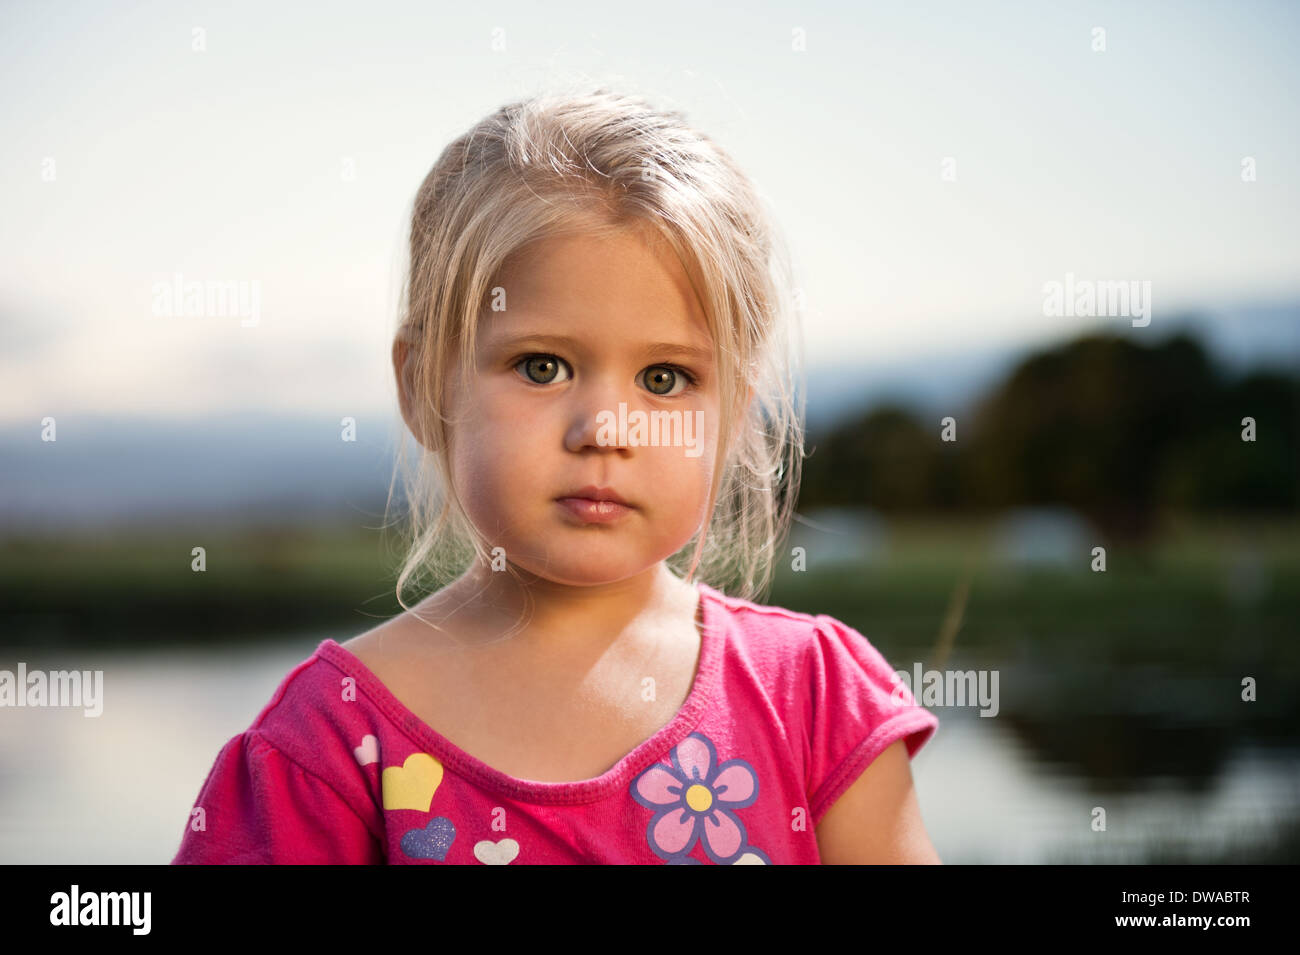 Cute toddler girl outdoors during sunset. Stock Photo